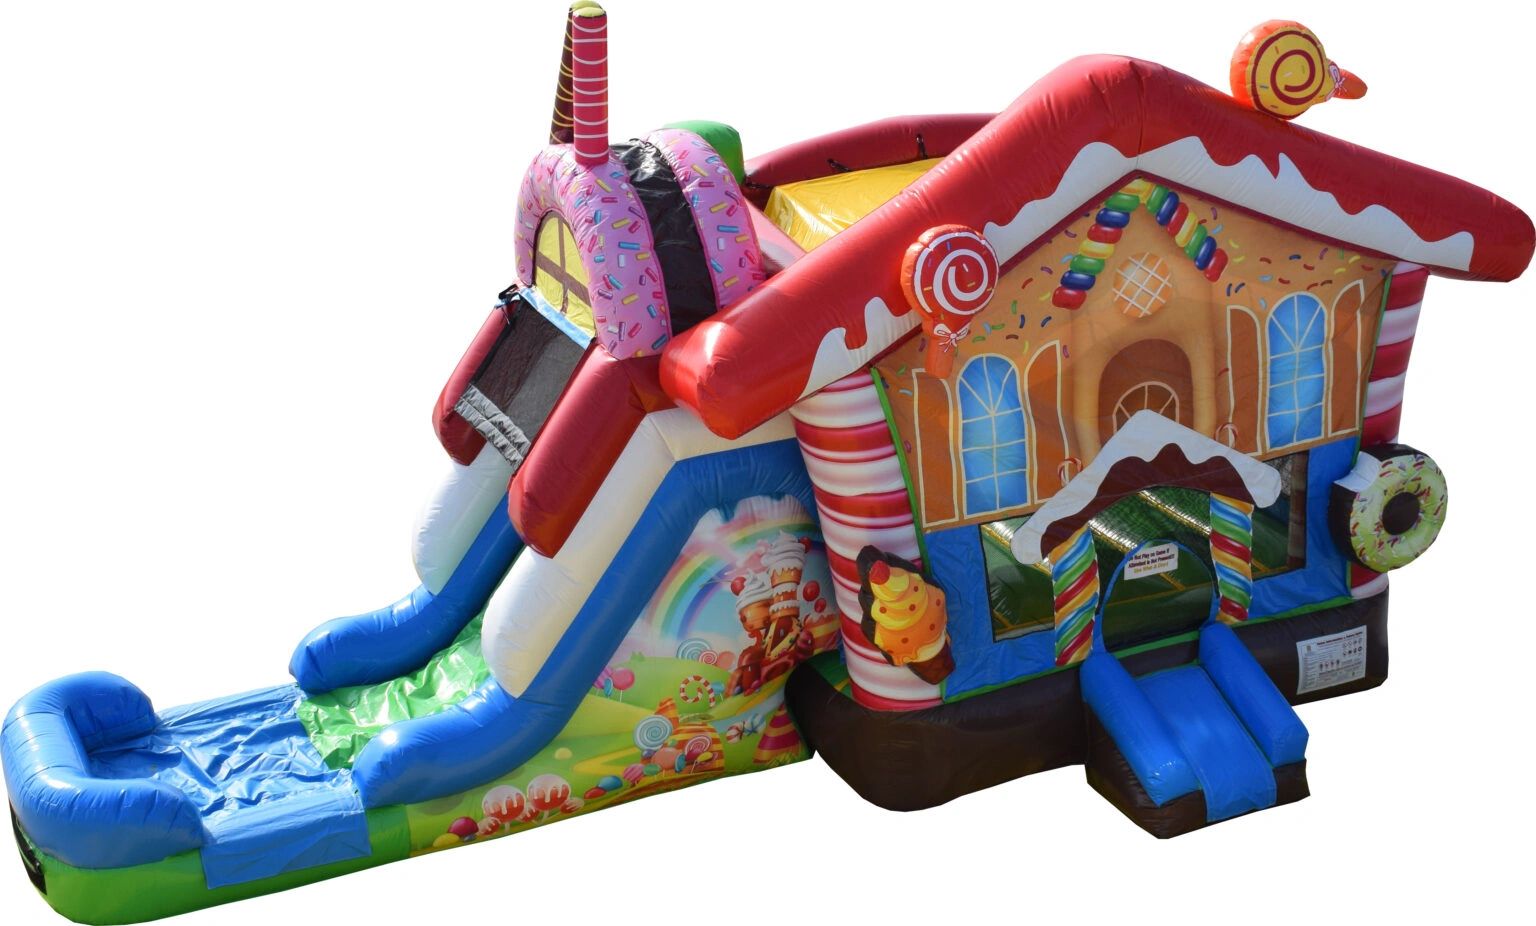 Candyland themed Bounce House Rental from www.itstime2bounce.com in Nashville TN